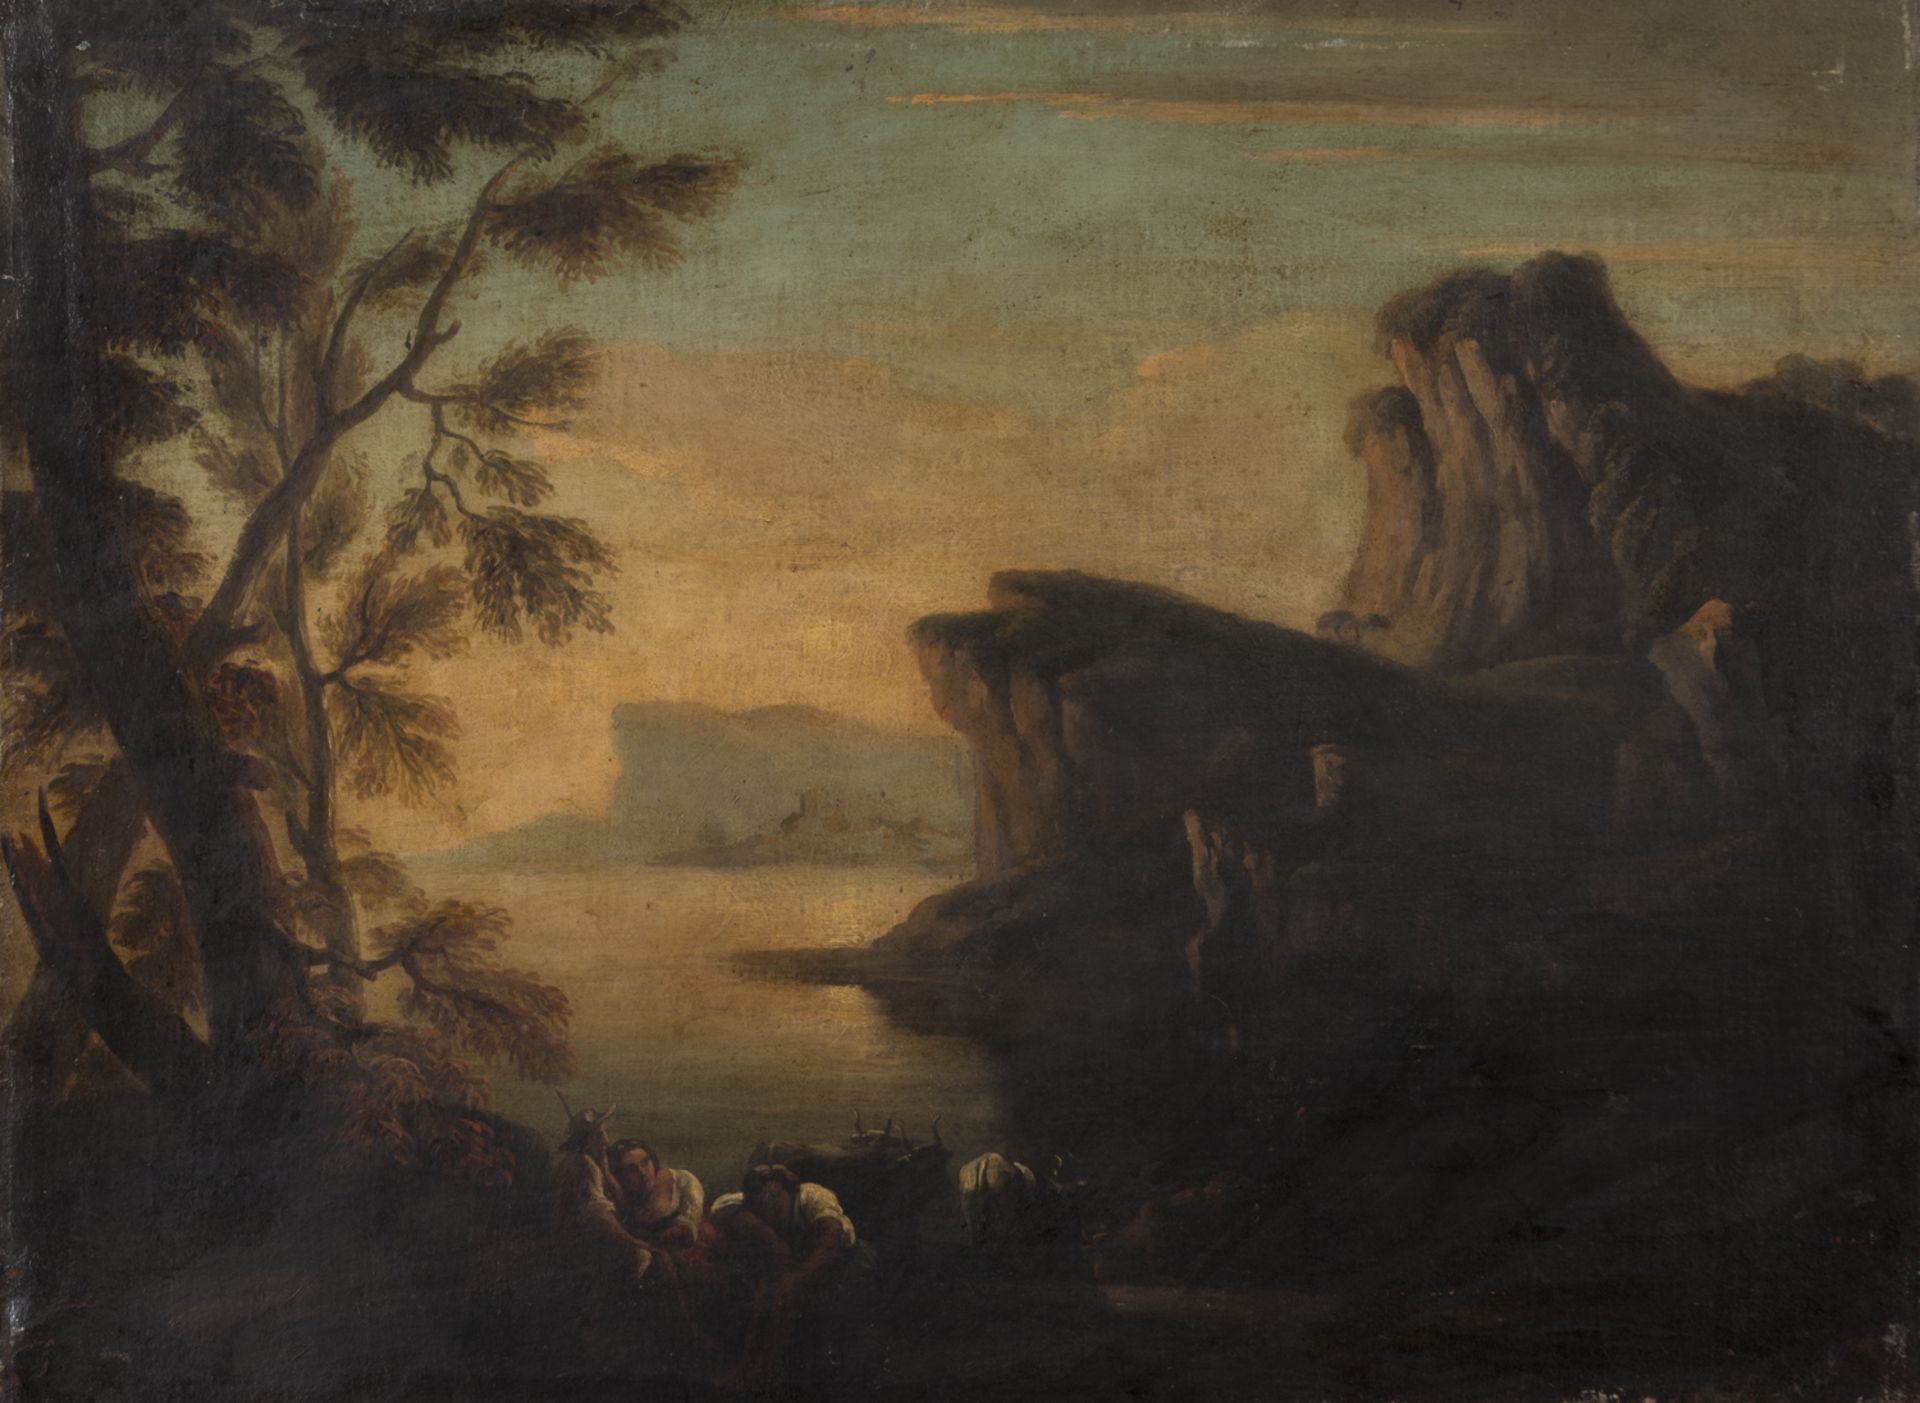 OIL PAINTING OF A LANDSCAPE BY DUTCH SCHOOL 19TH CENTURY